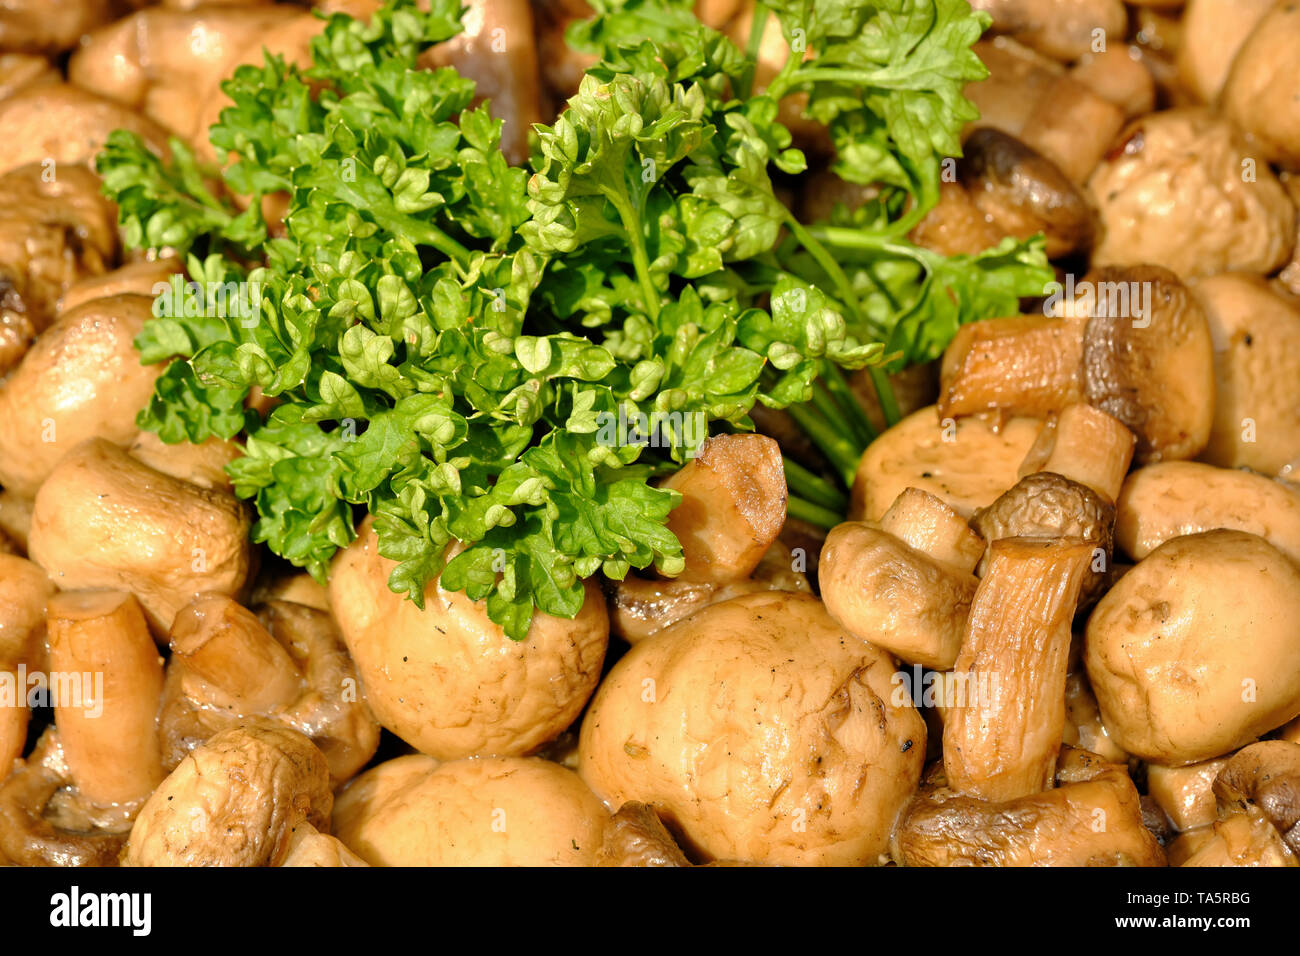 Grilled mushrooms champignons in a bowl close up Stock Photo